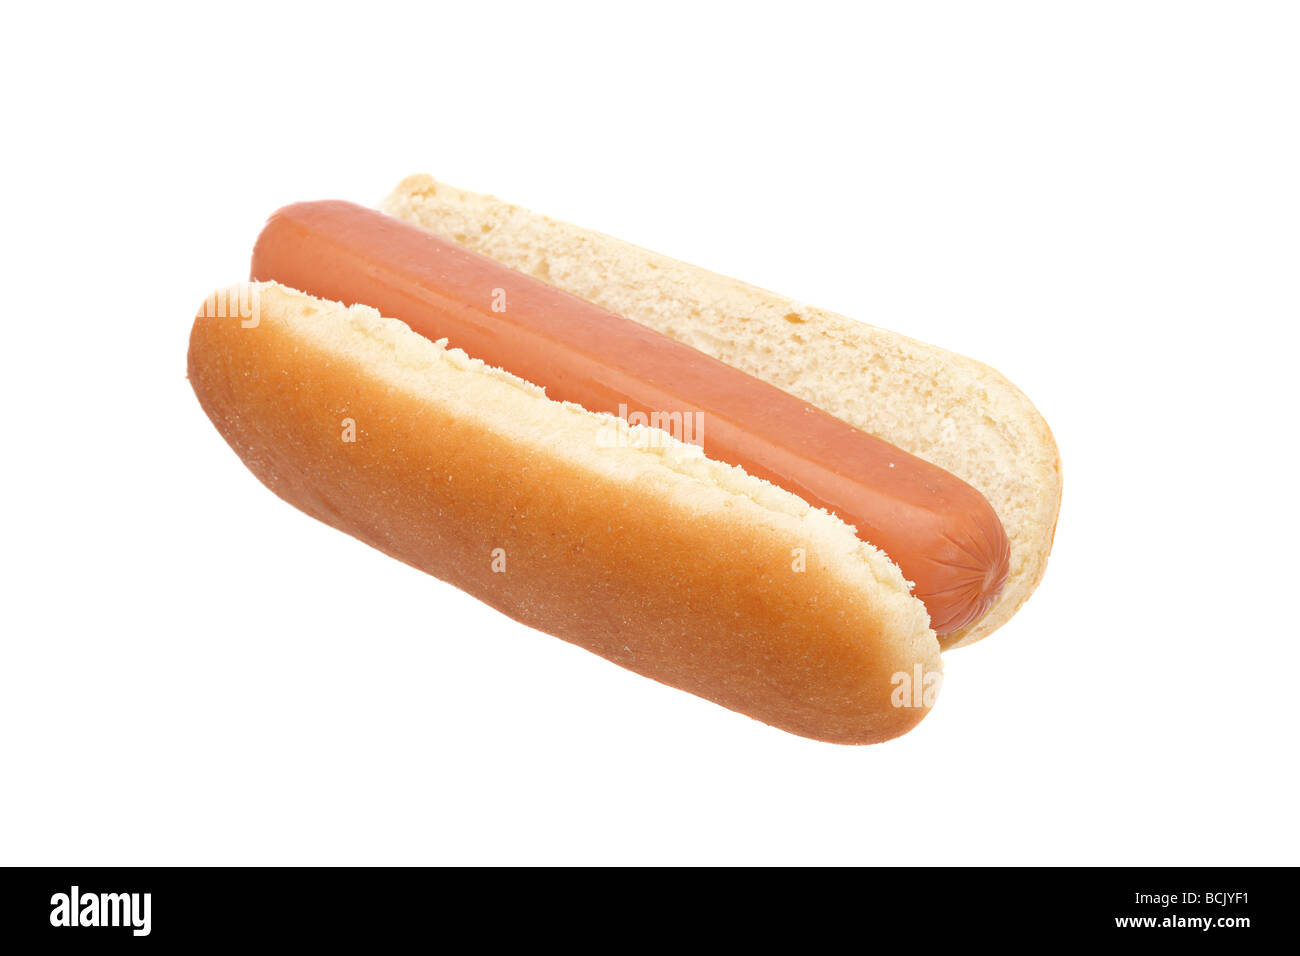 A hot dog isolated on white background Shallow depth of field Stock Photo